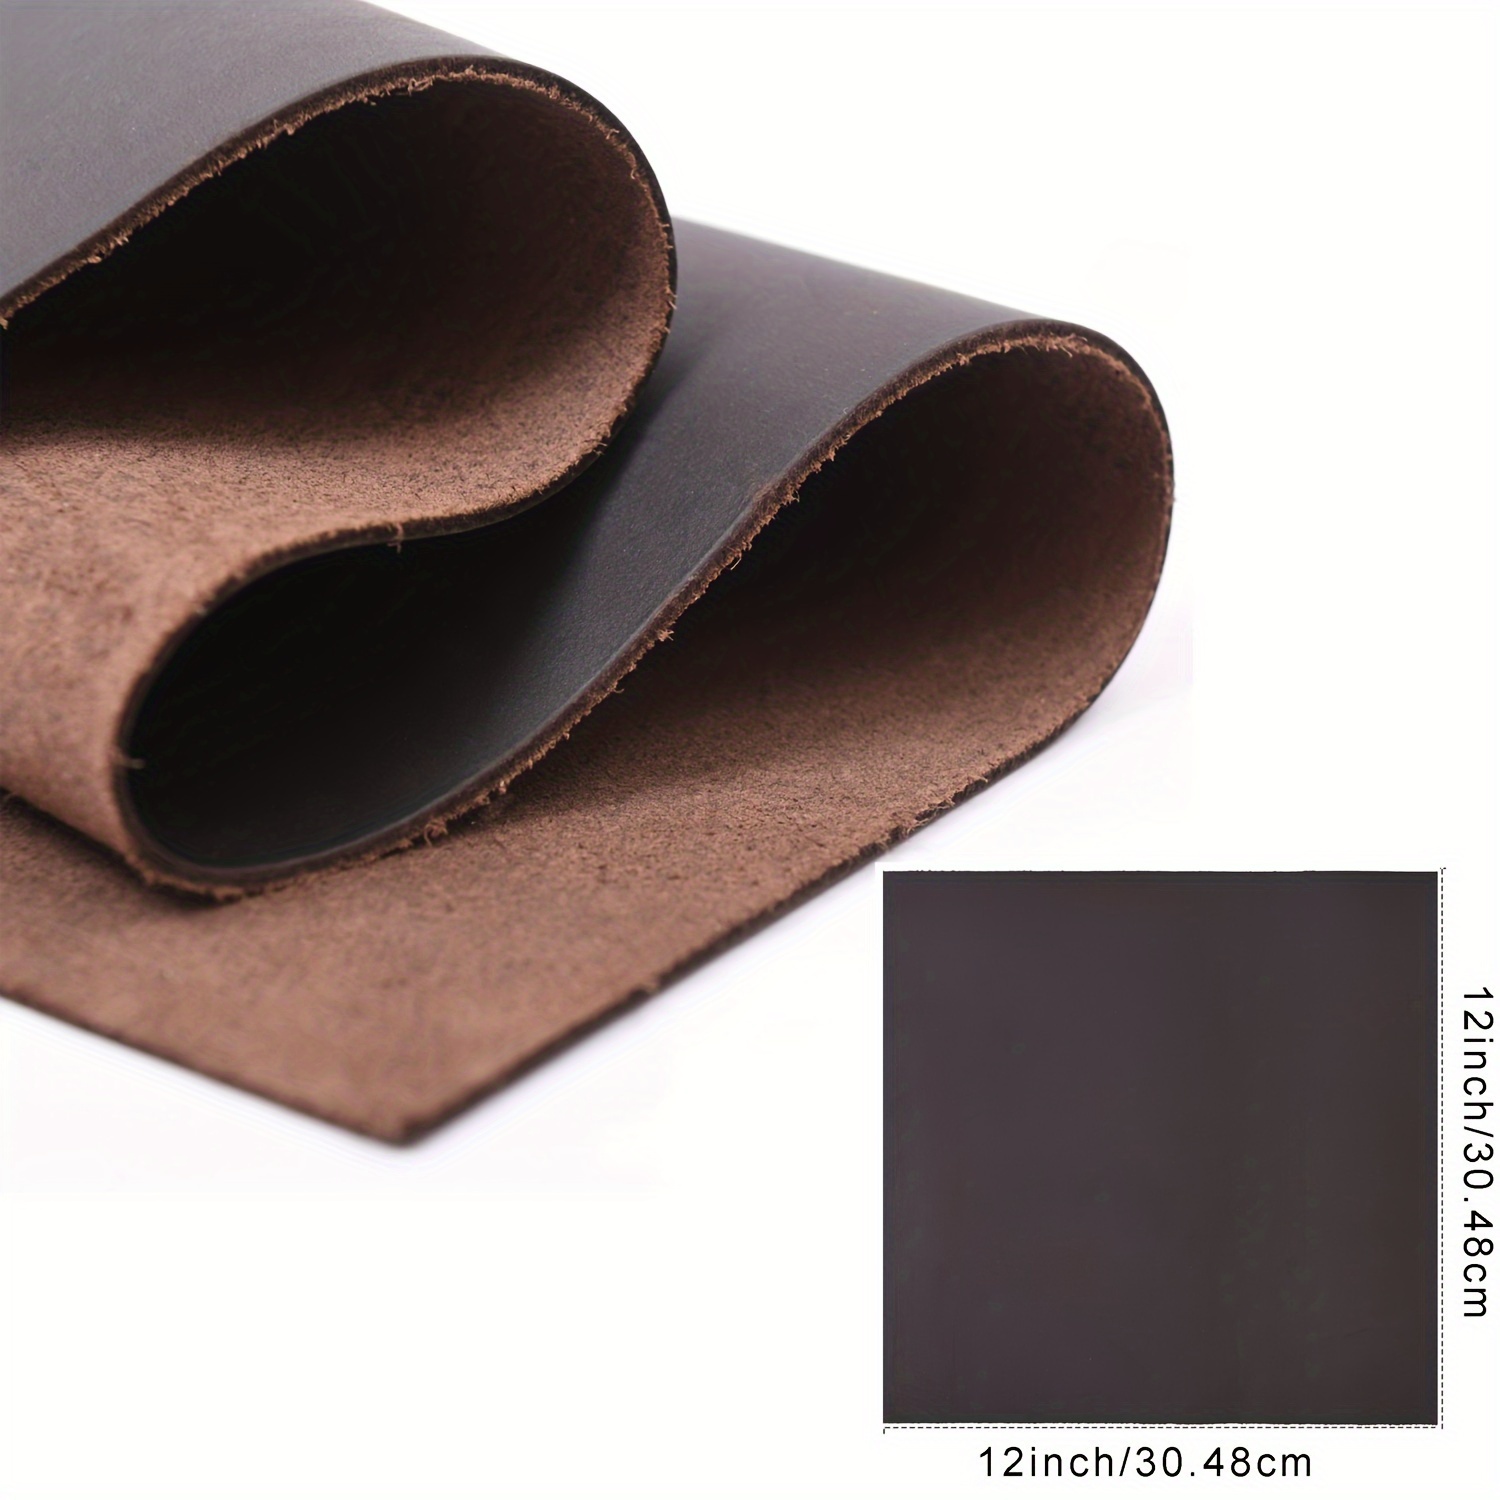 M2A Real Cowhide Genuine Leather Scraps for Crafting from High-end Boutique Furniture Maker (No Snakeskin) for Upholstery, Arts & Crafts, Wallets –